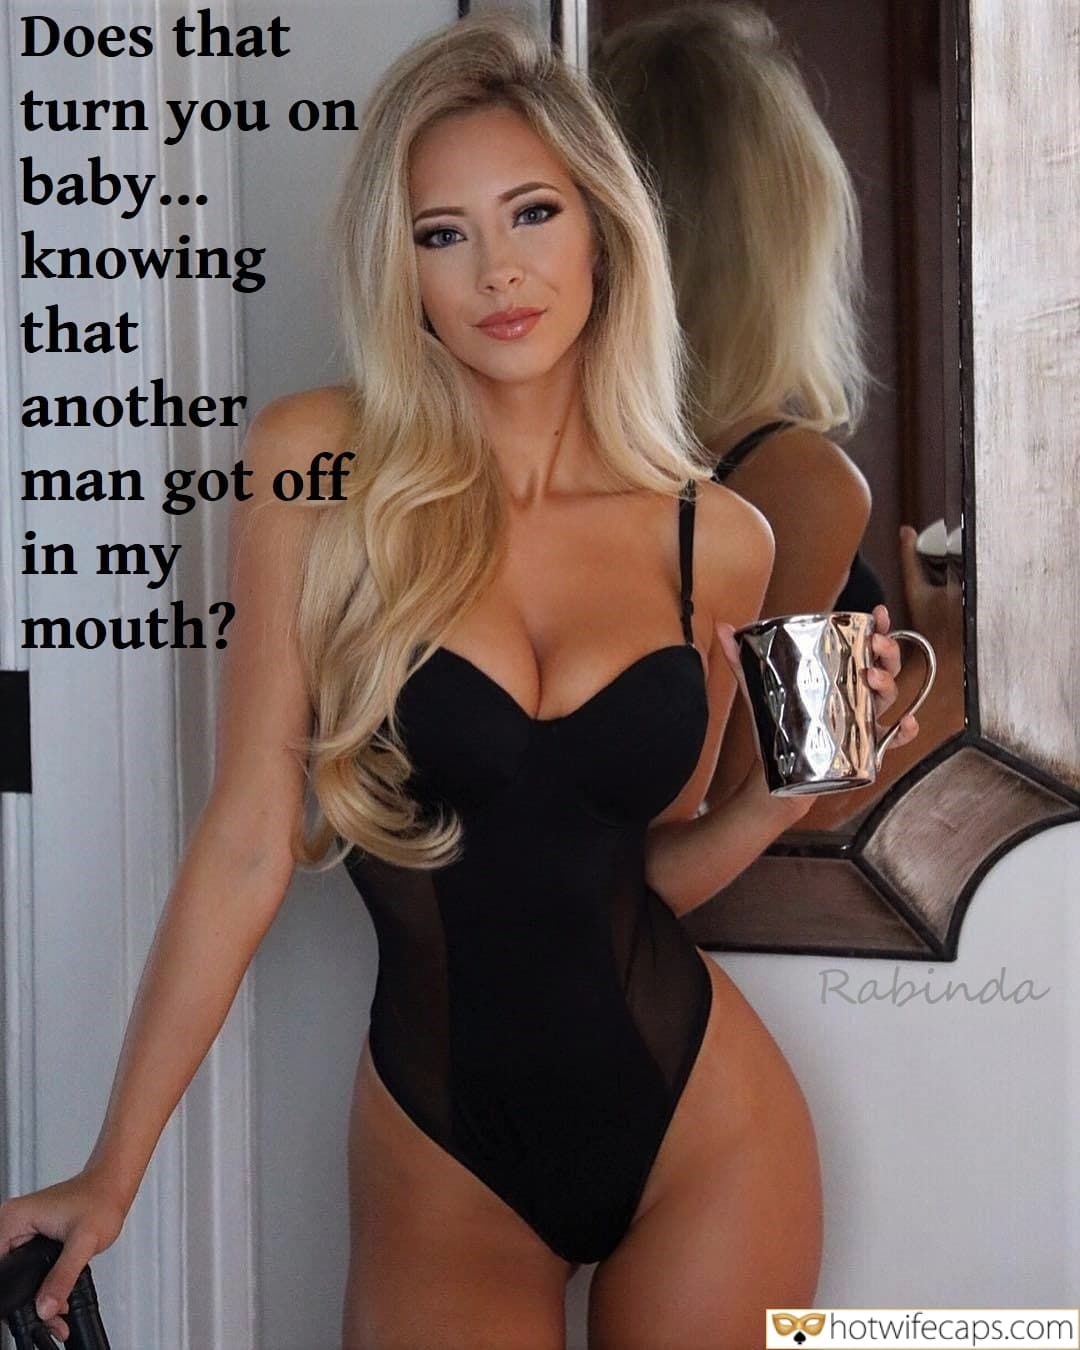 Bigger Cock, Blowjob, Bull, Bully, Sexy Memes, Wife Sharing Hotwife Caption №565248 mature blonde with a perfect body billede